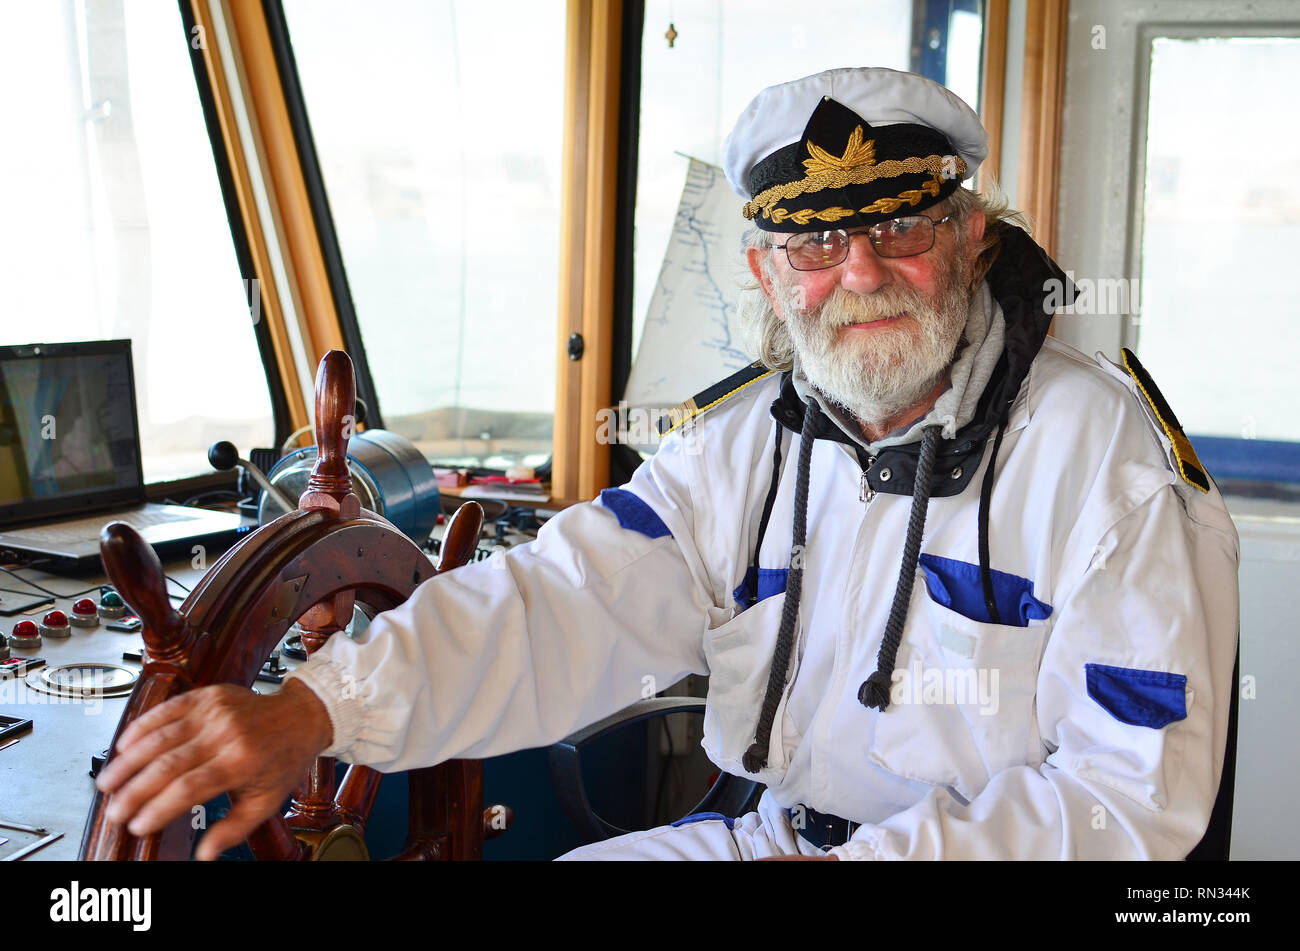 Captain Ship Beard High Resolution Stock Photography and Images - Alamy